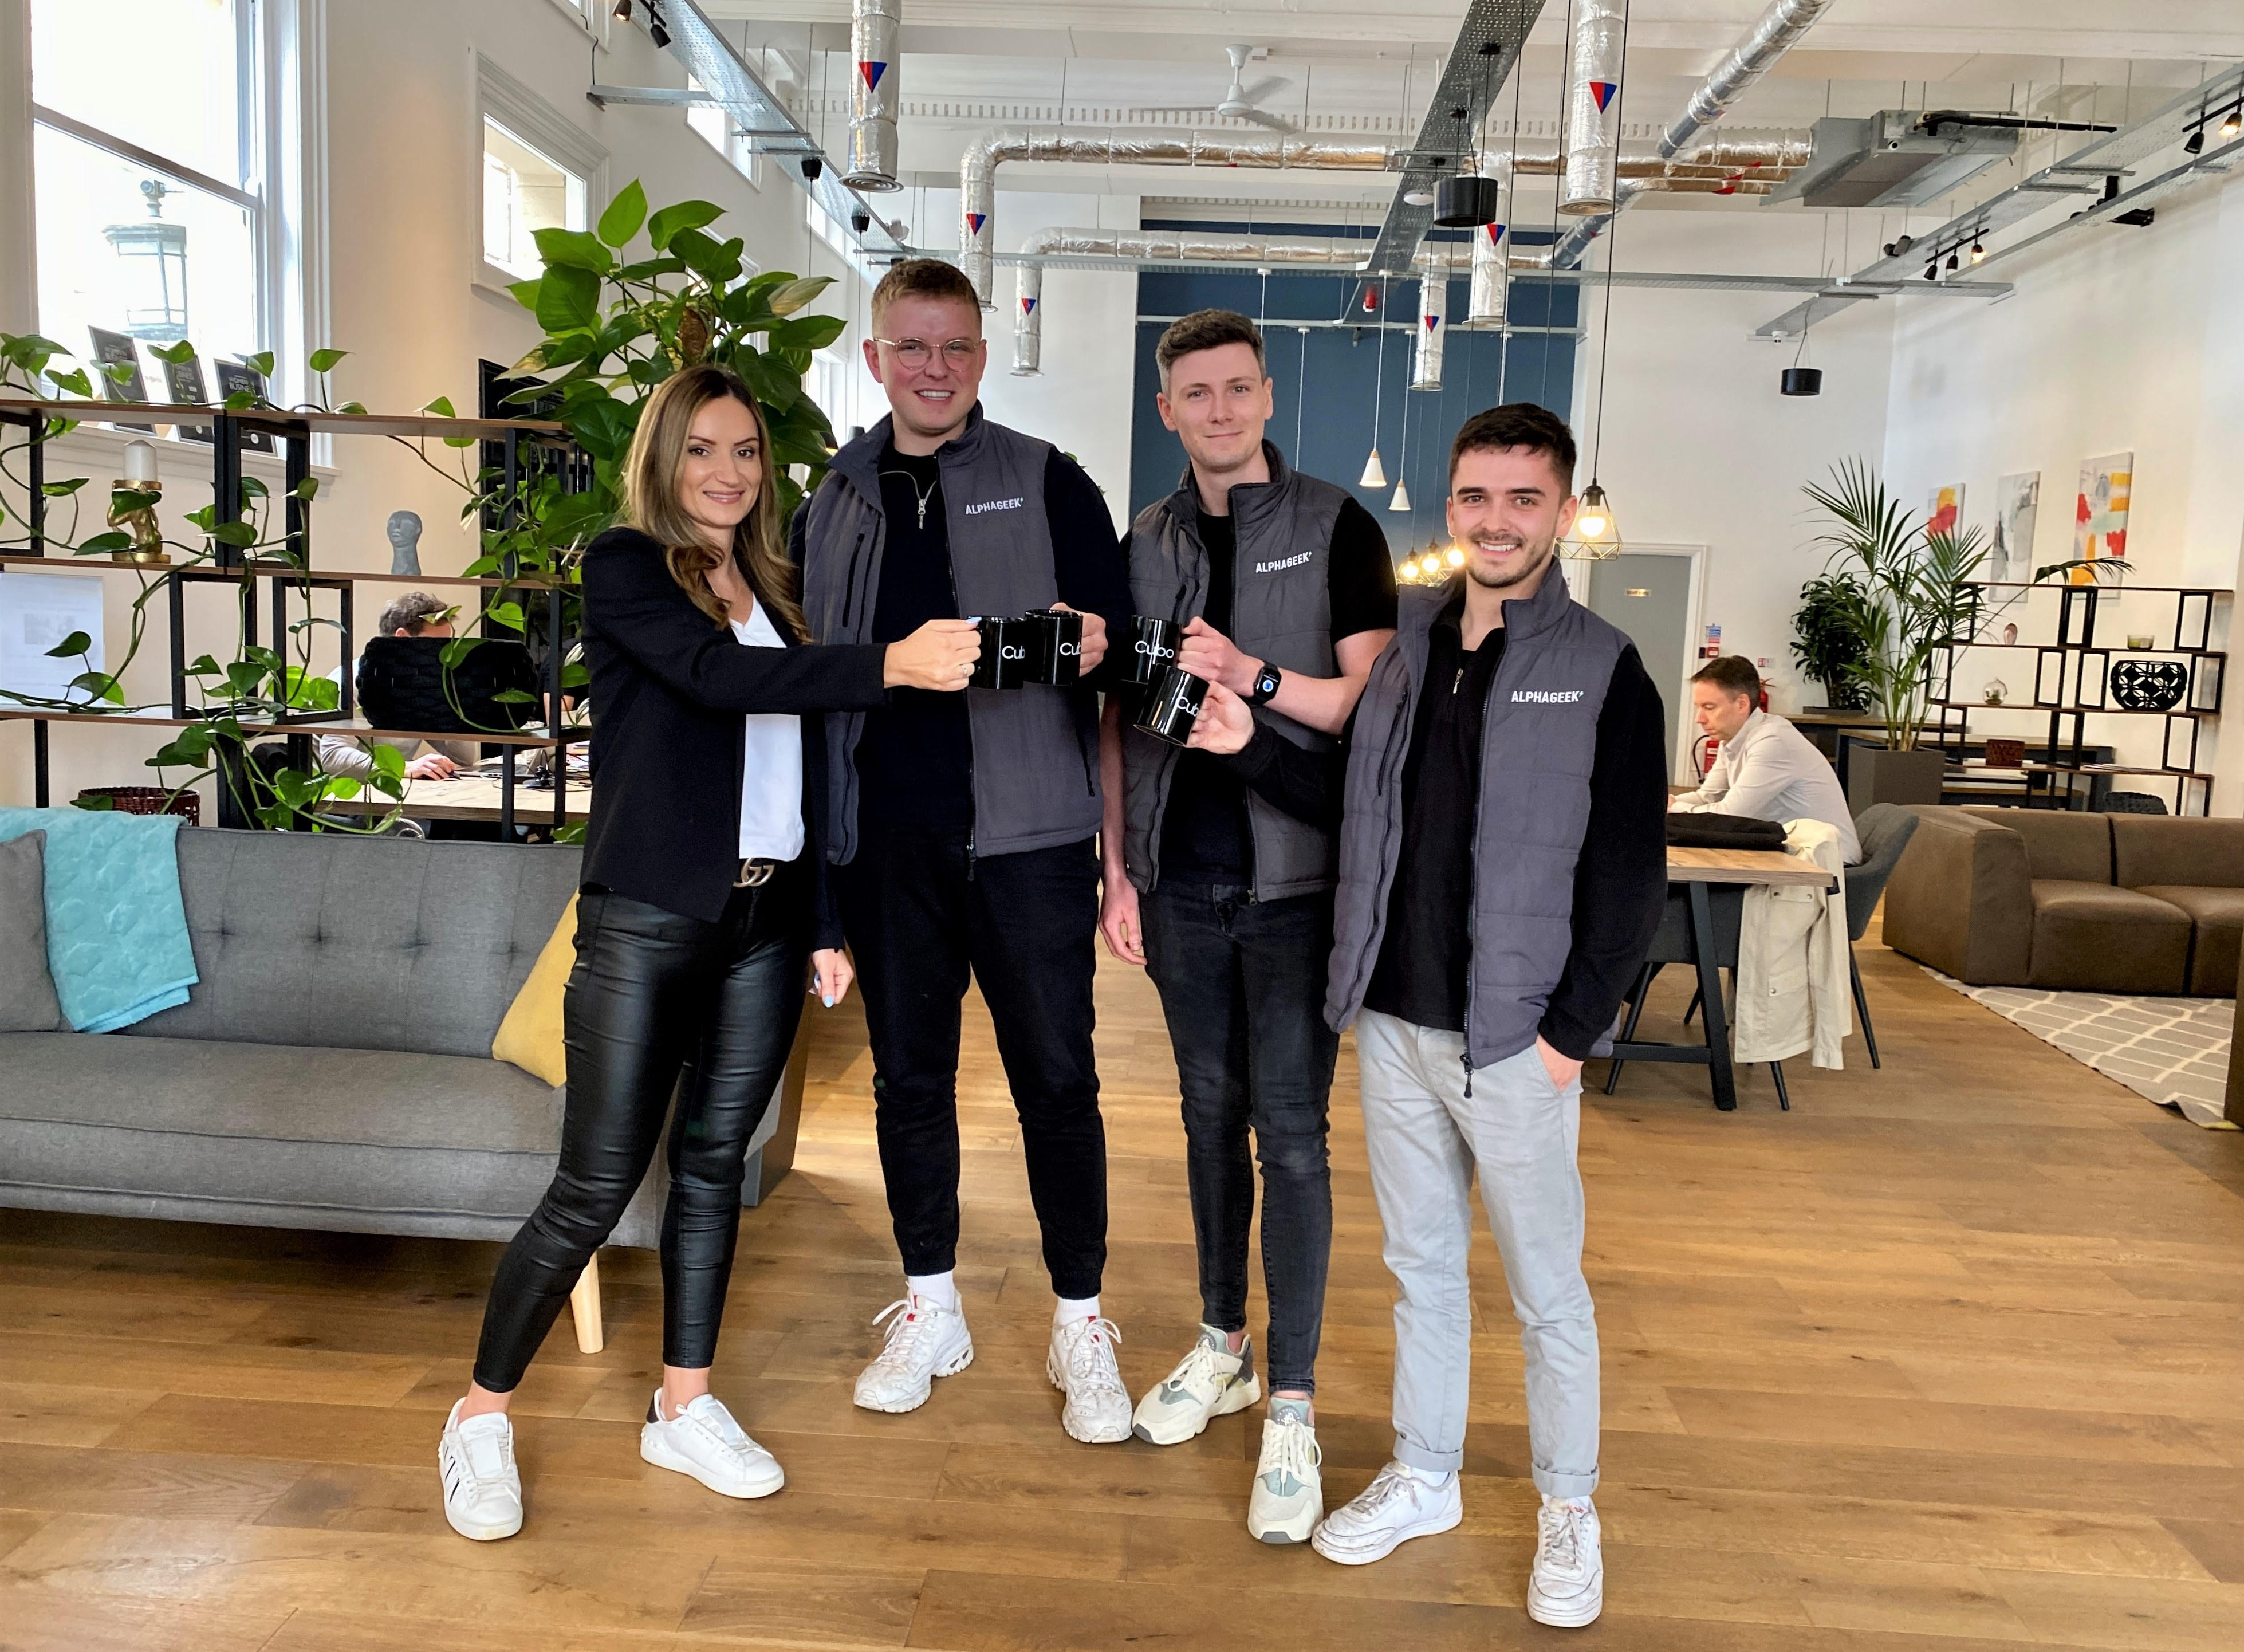 Digital marketing firm expands into Cubo